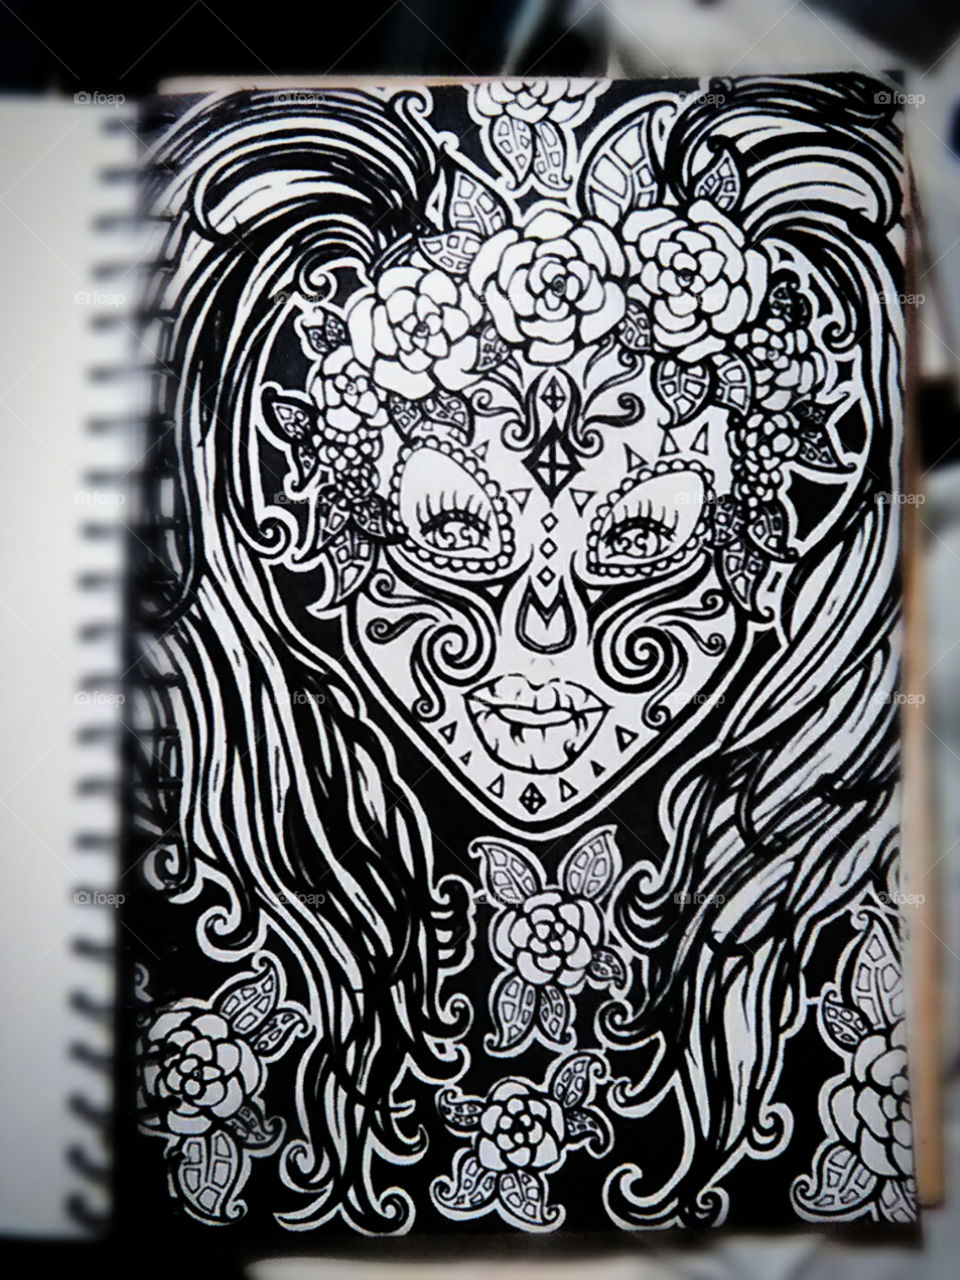 sugar skull drawling... I hope to one day make a coloring book